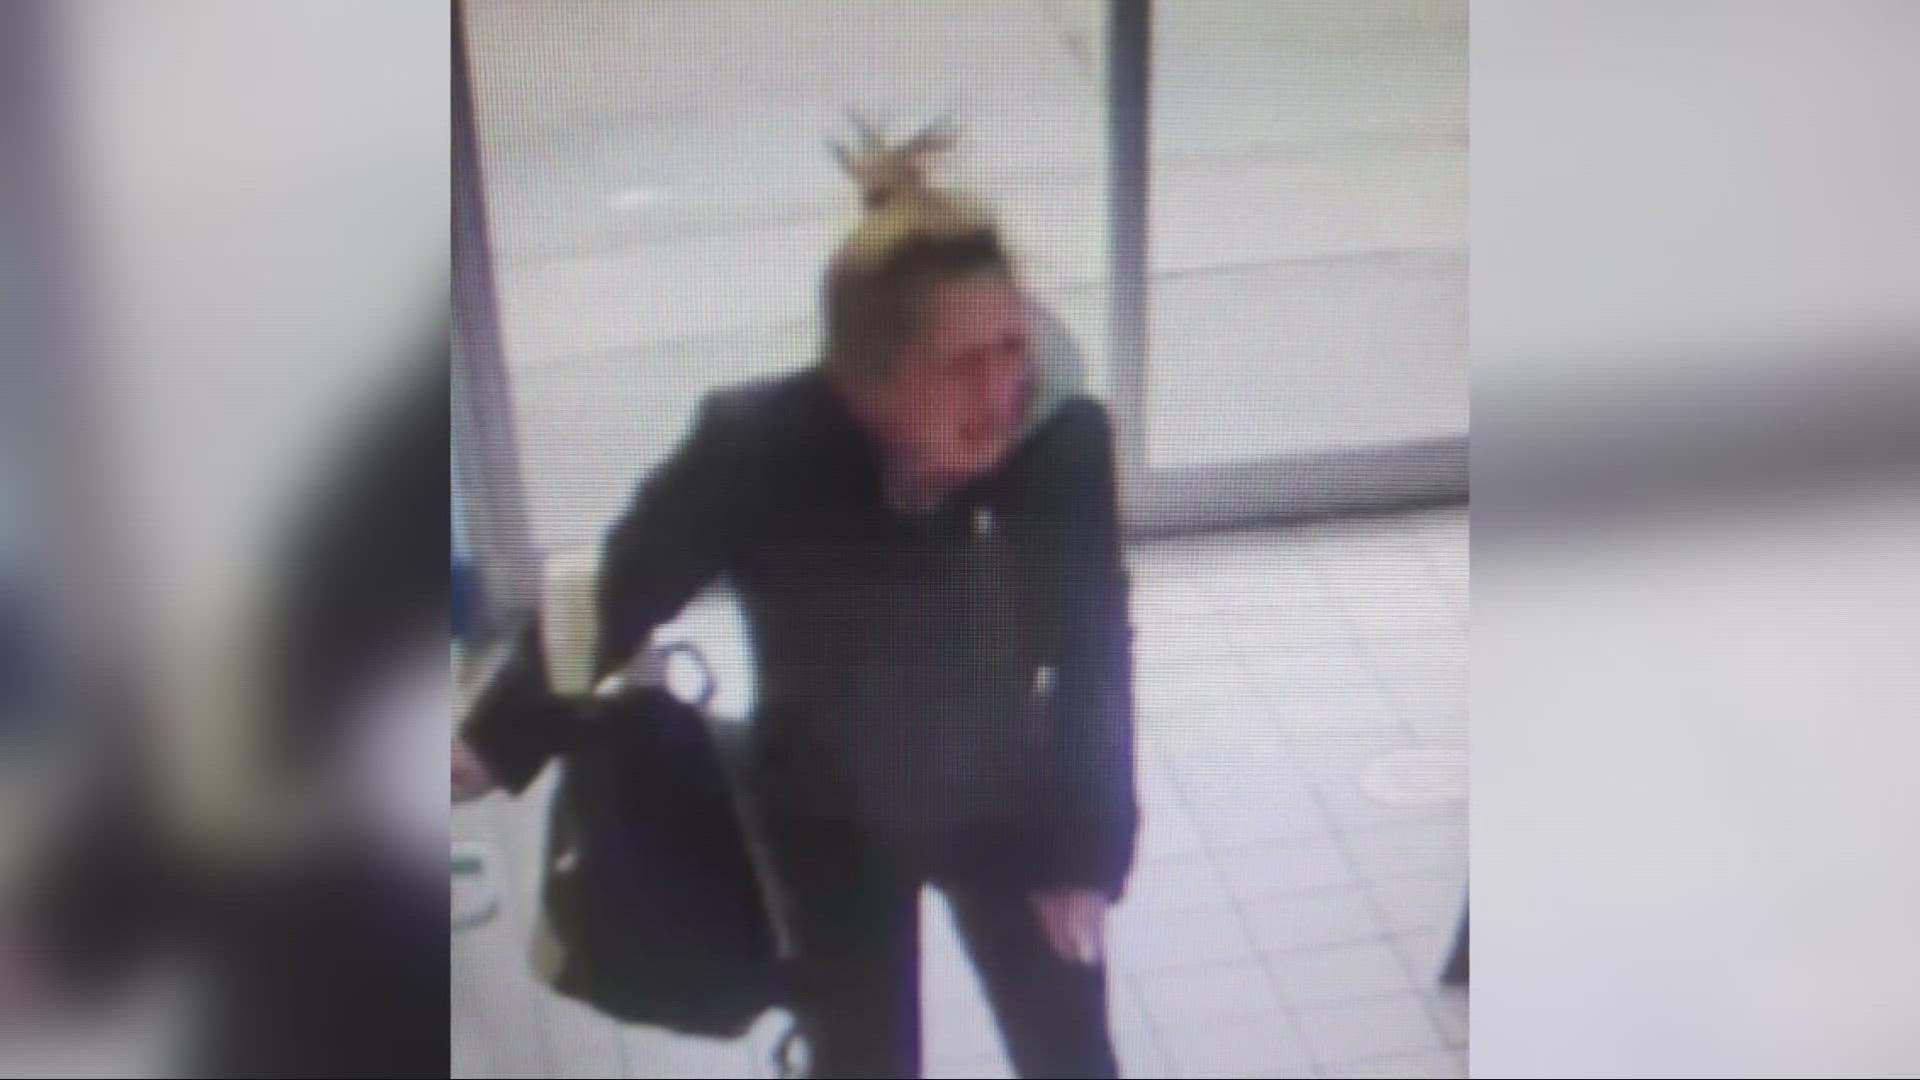 The woman who was reported missing after an alleged kidnapping incident at a Cleveland RTA has been found safe.